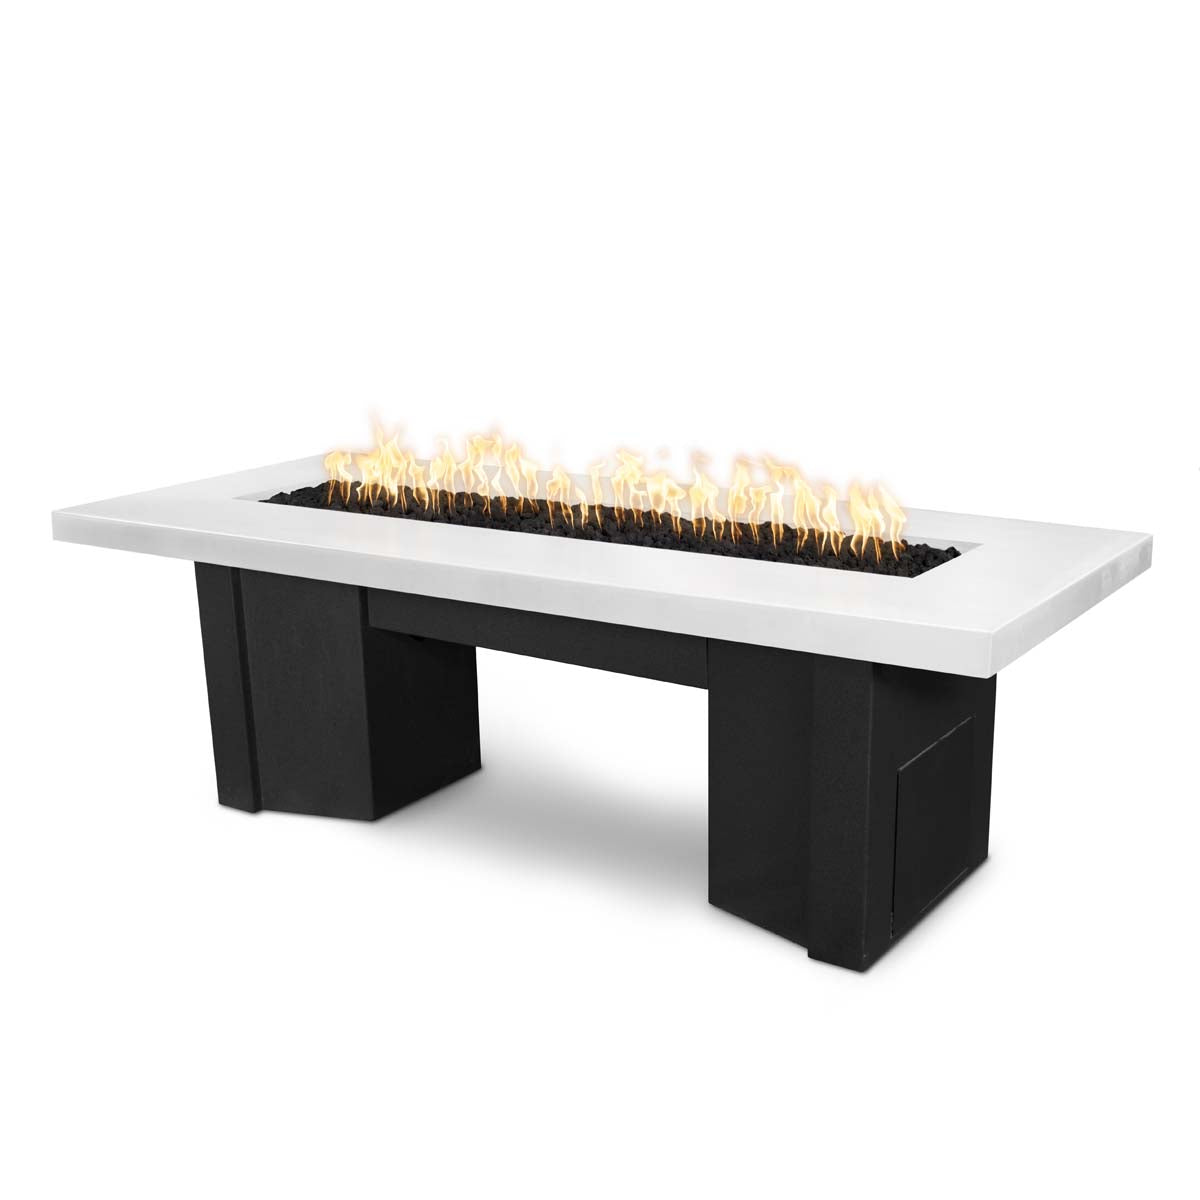 The Outdoor Plus Rectangular Alameda 78" Black & White Powder Coated Liquid Propane Fire Pit with Flame Sense with Spark Ignition